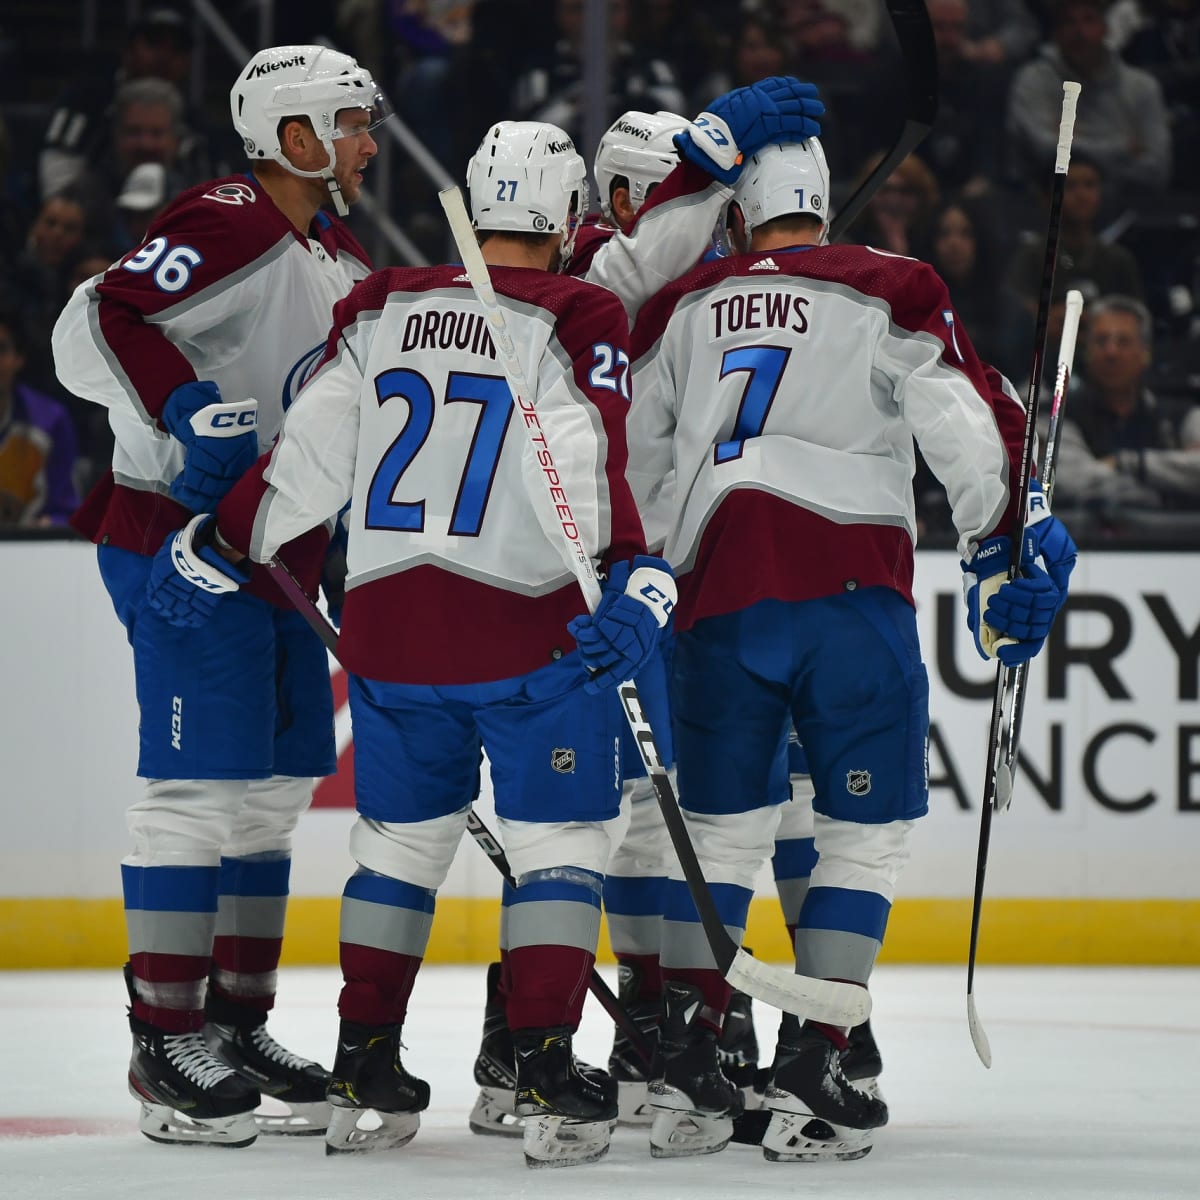 Mikko Rantanen has 2 goals and 2 assists, Avalanche beat Kings 5-2